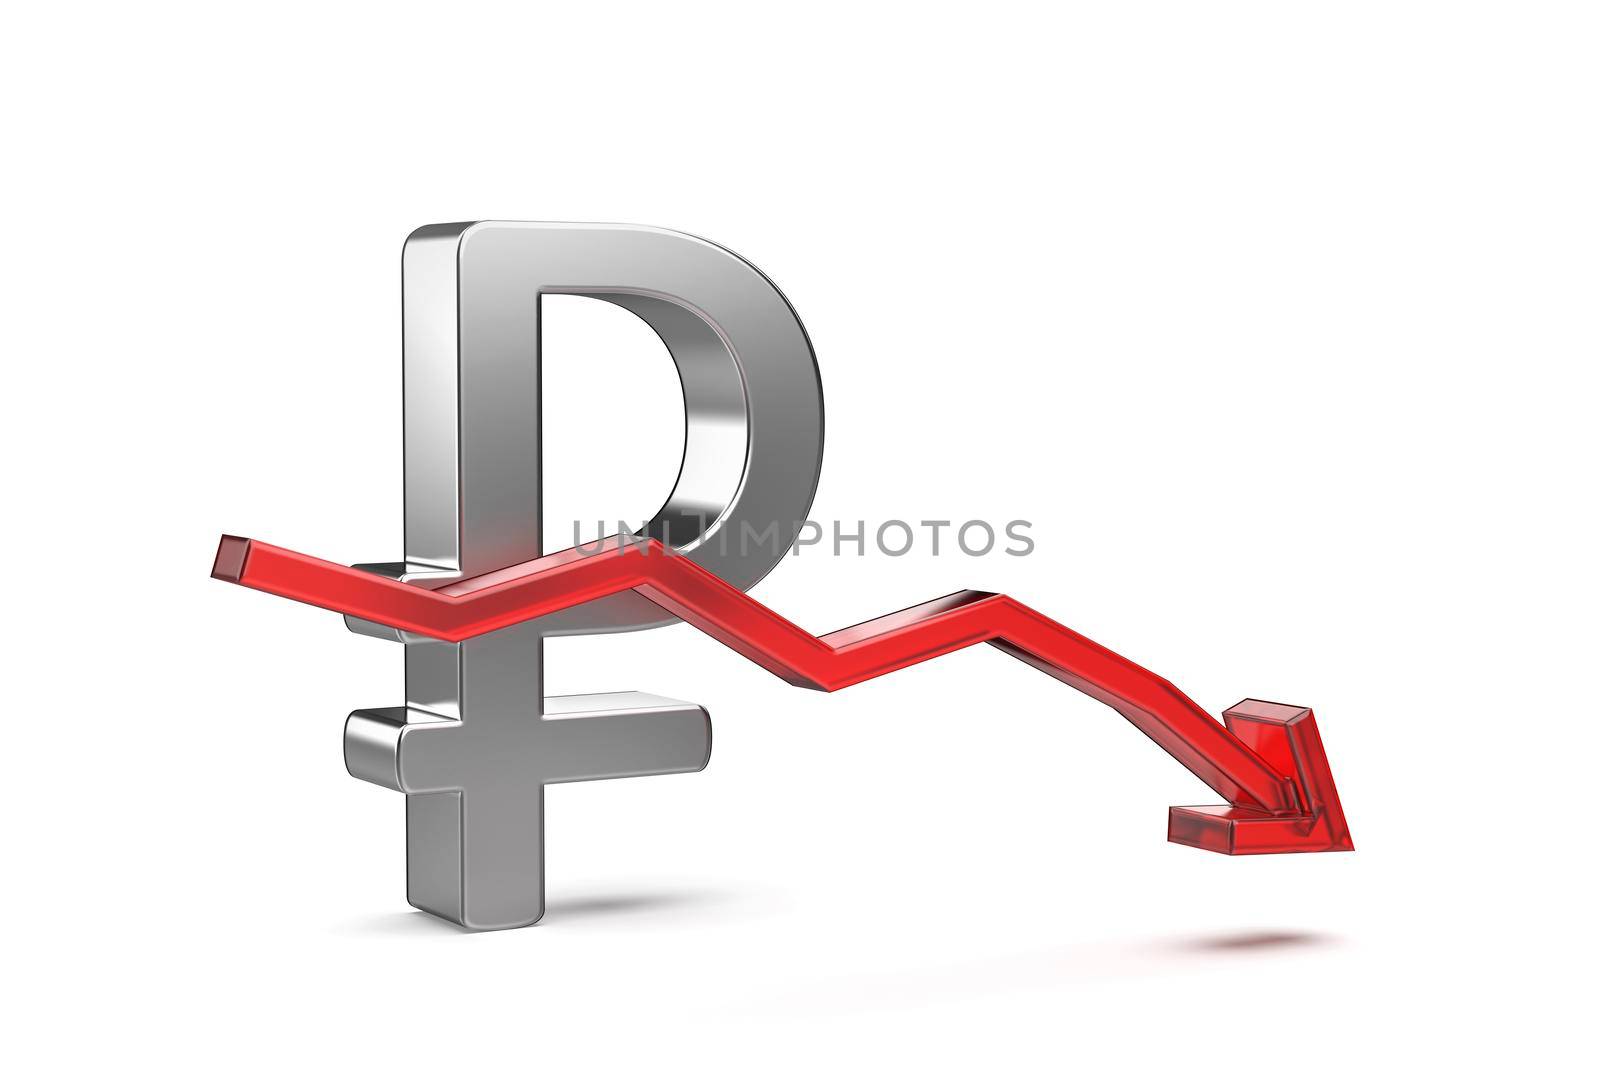 Decreasing the value of Russian ruble currency, concept image